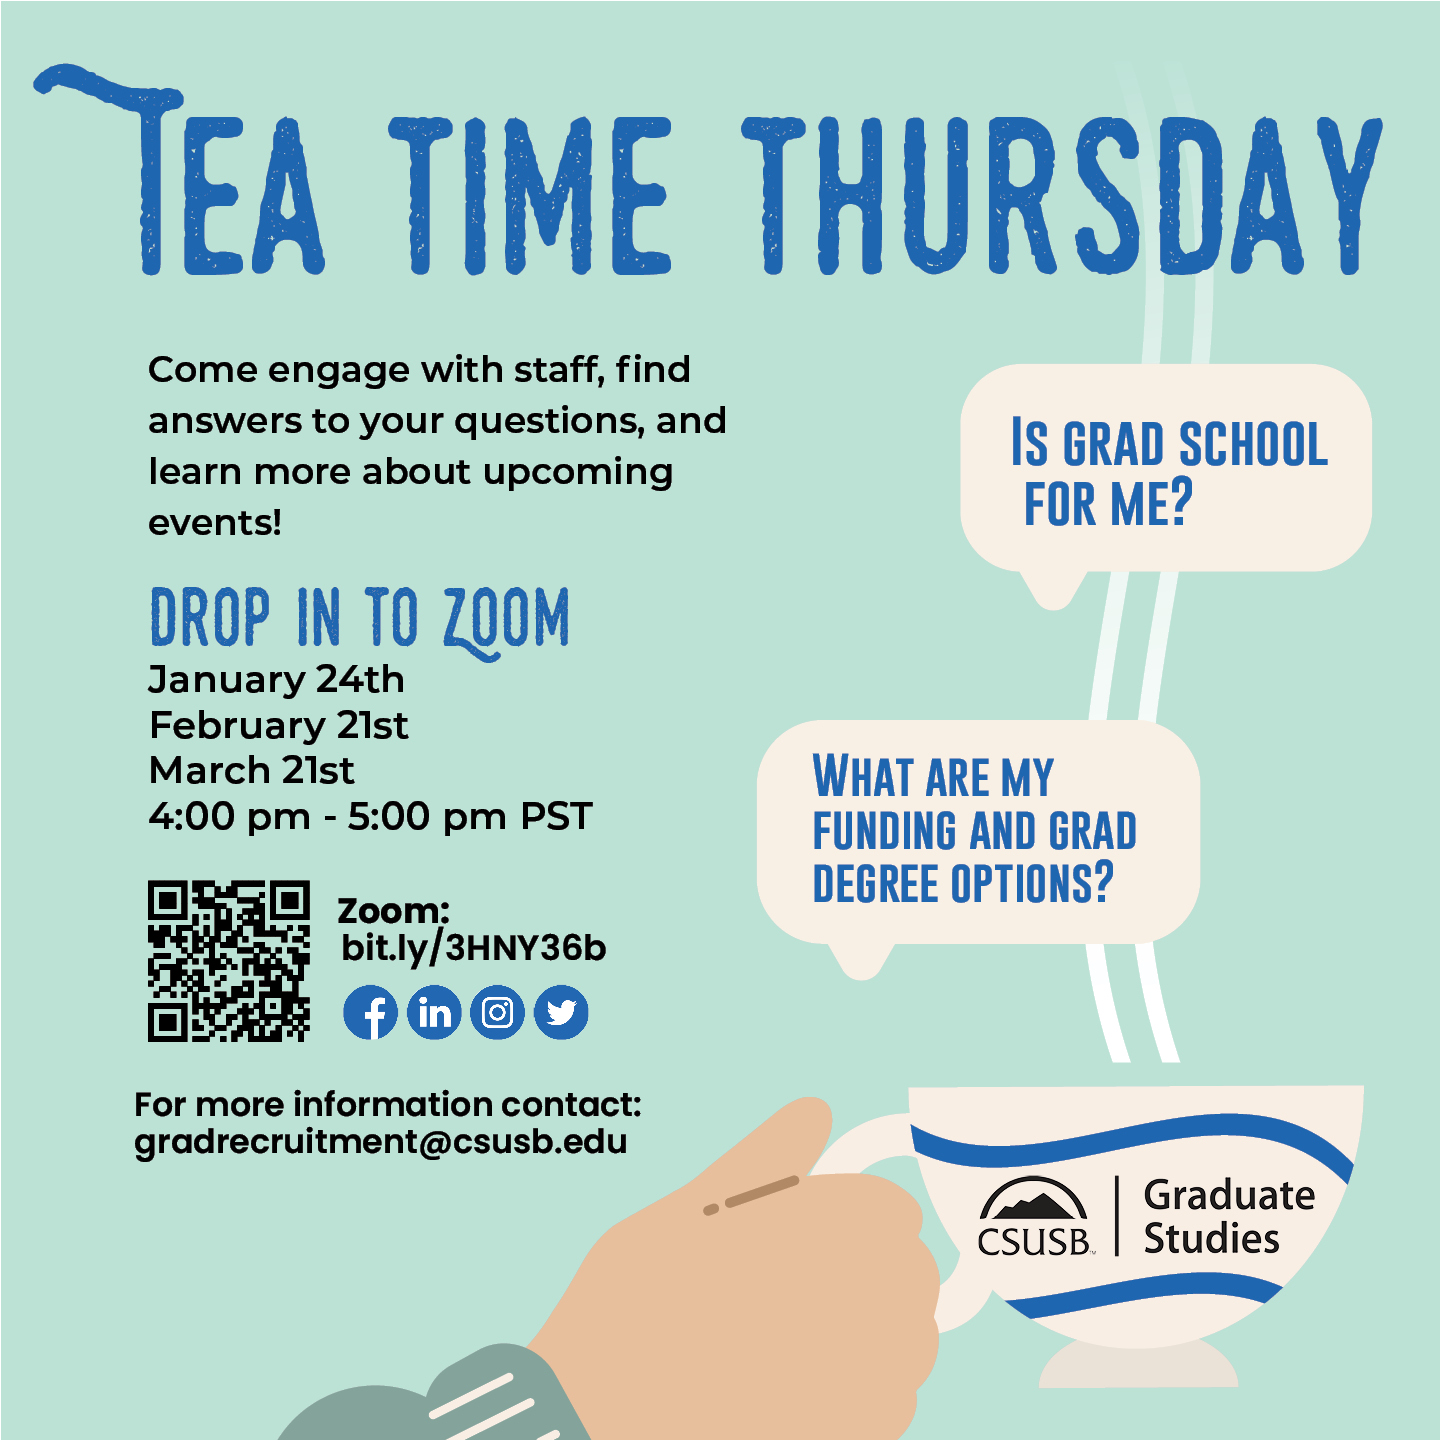 Tea Time Thursday drop-in session. Scan QR code to join